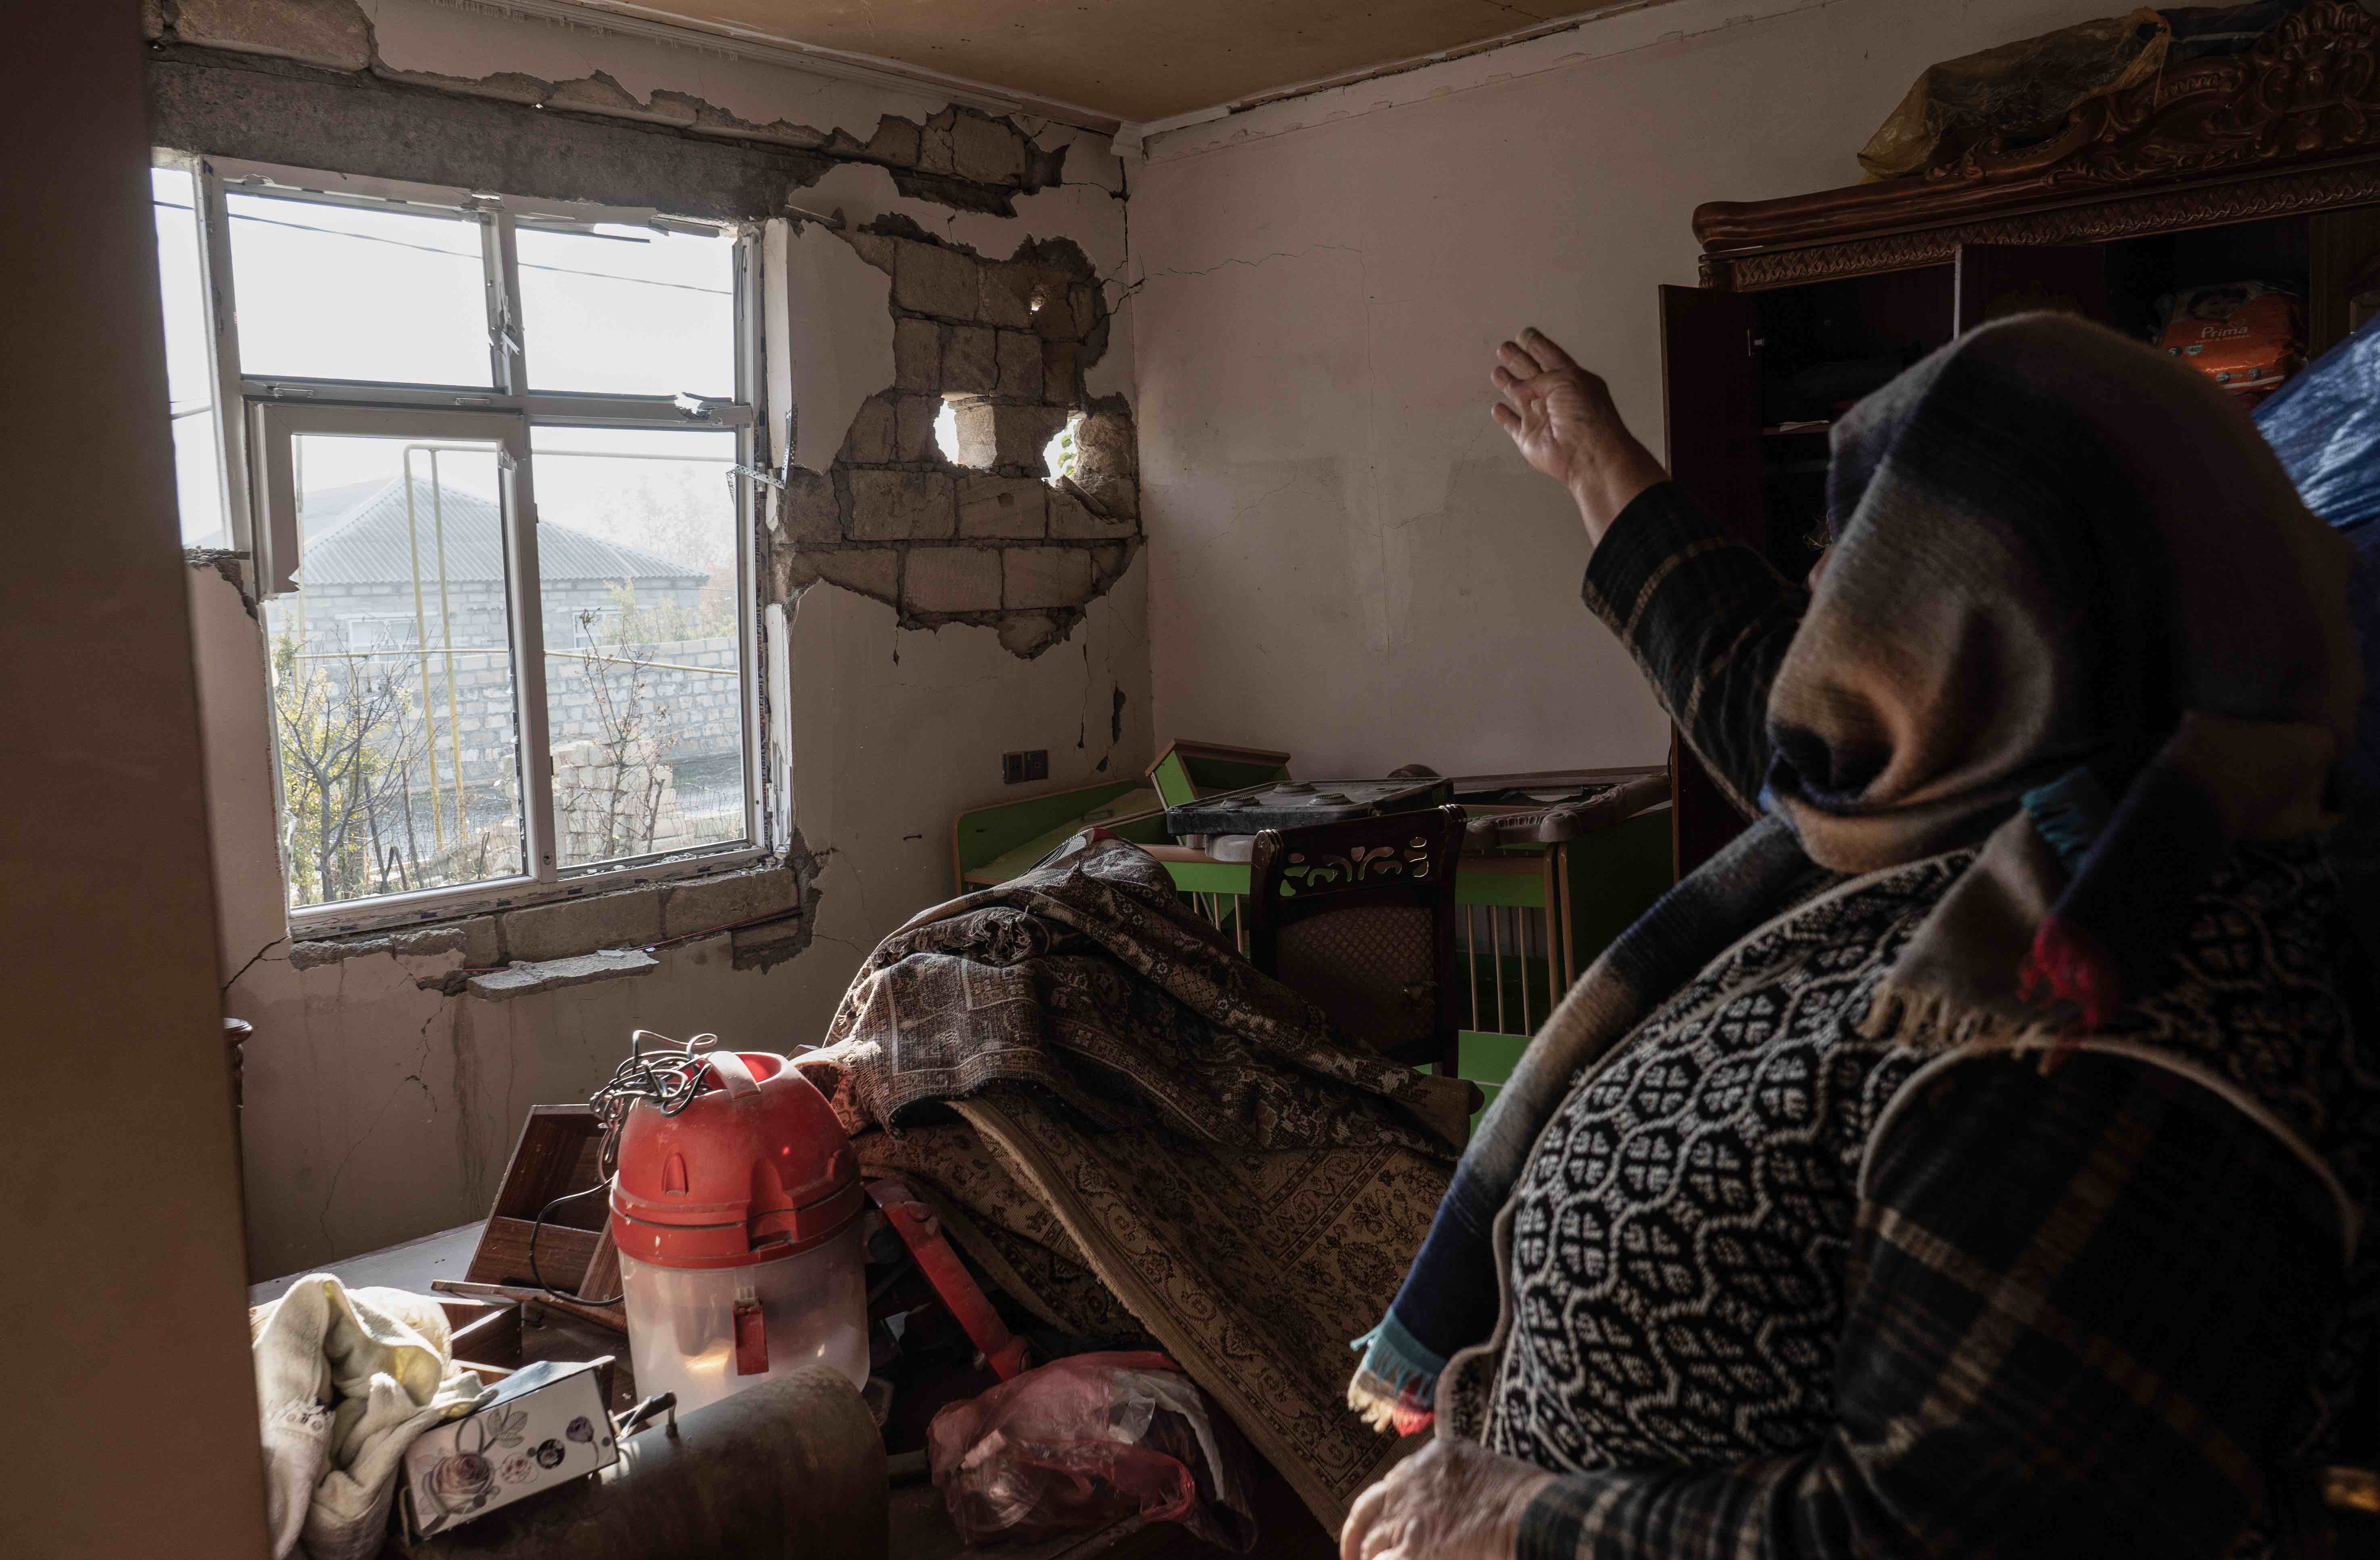 Shahla Gasimova, 60, points out some of the damage her house suffered during the war. She and her hu ...